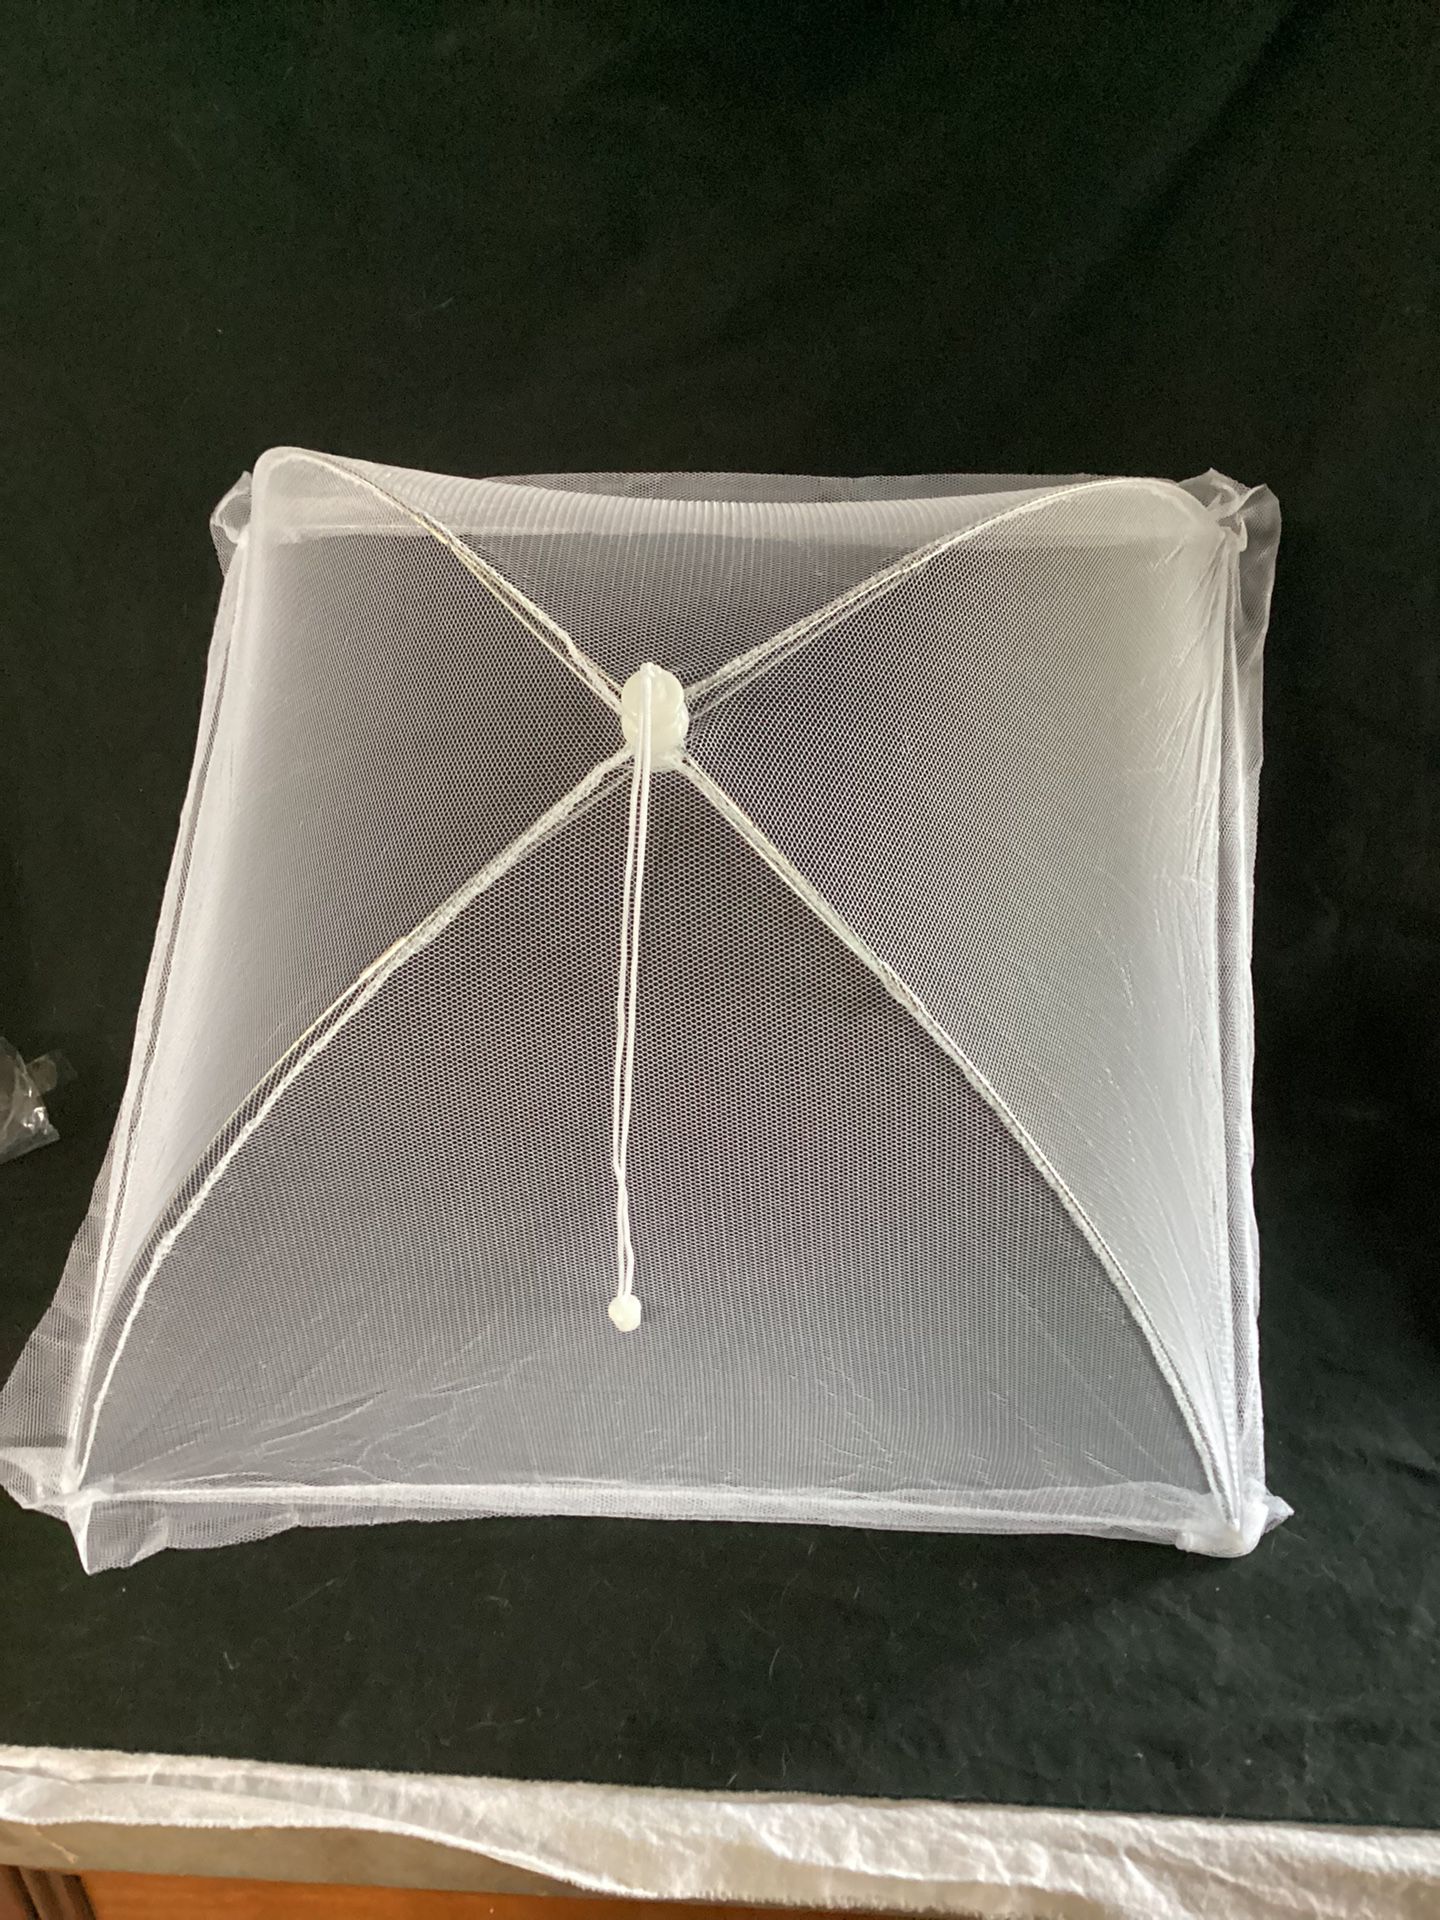 Brand New Large Food Tent.  17.5” X 16.5”.